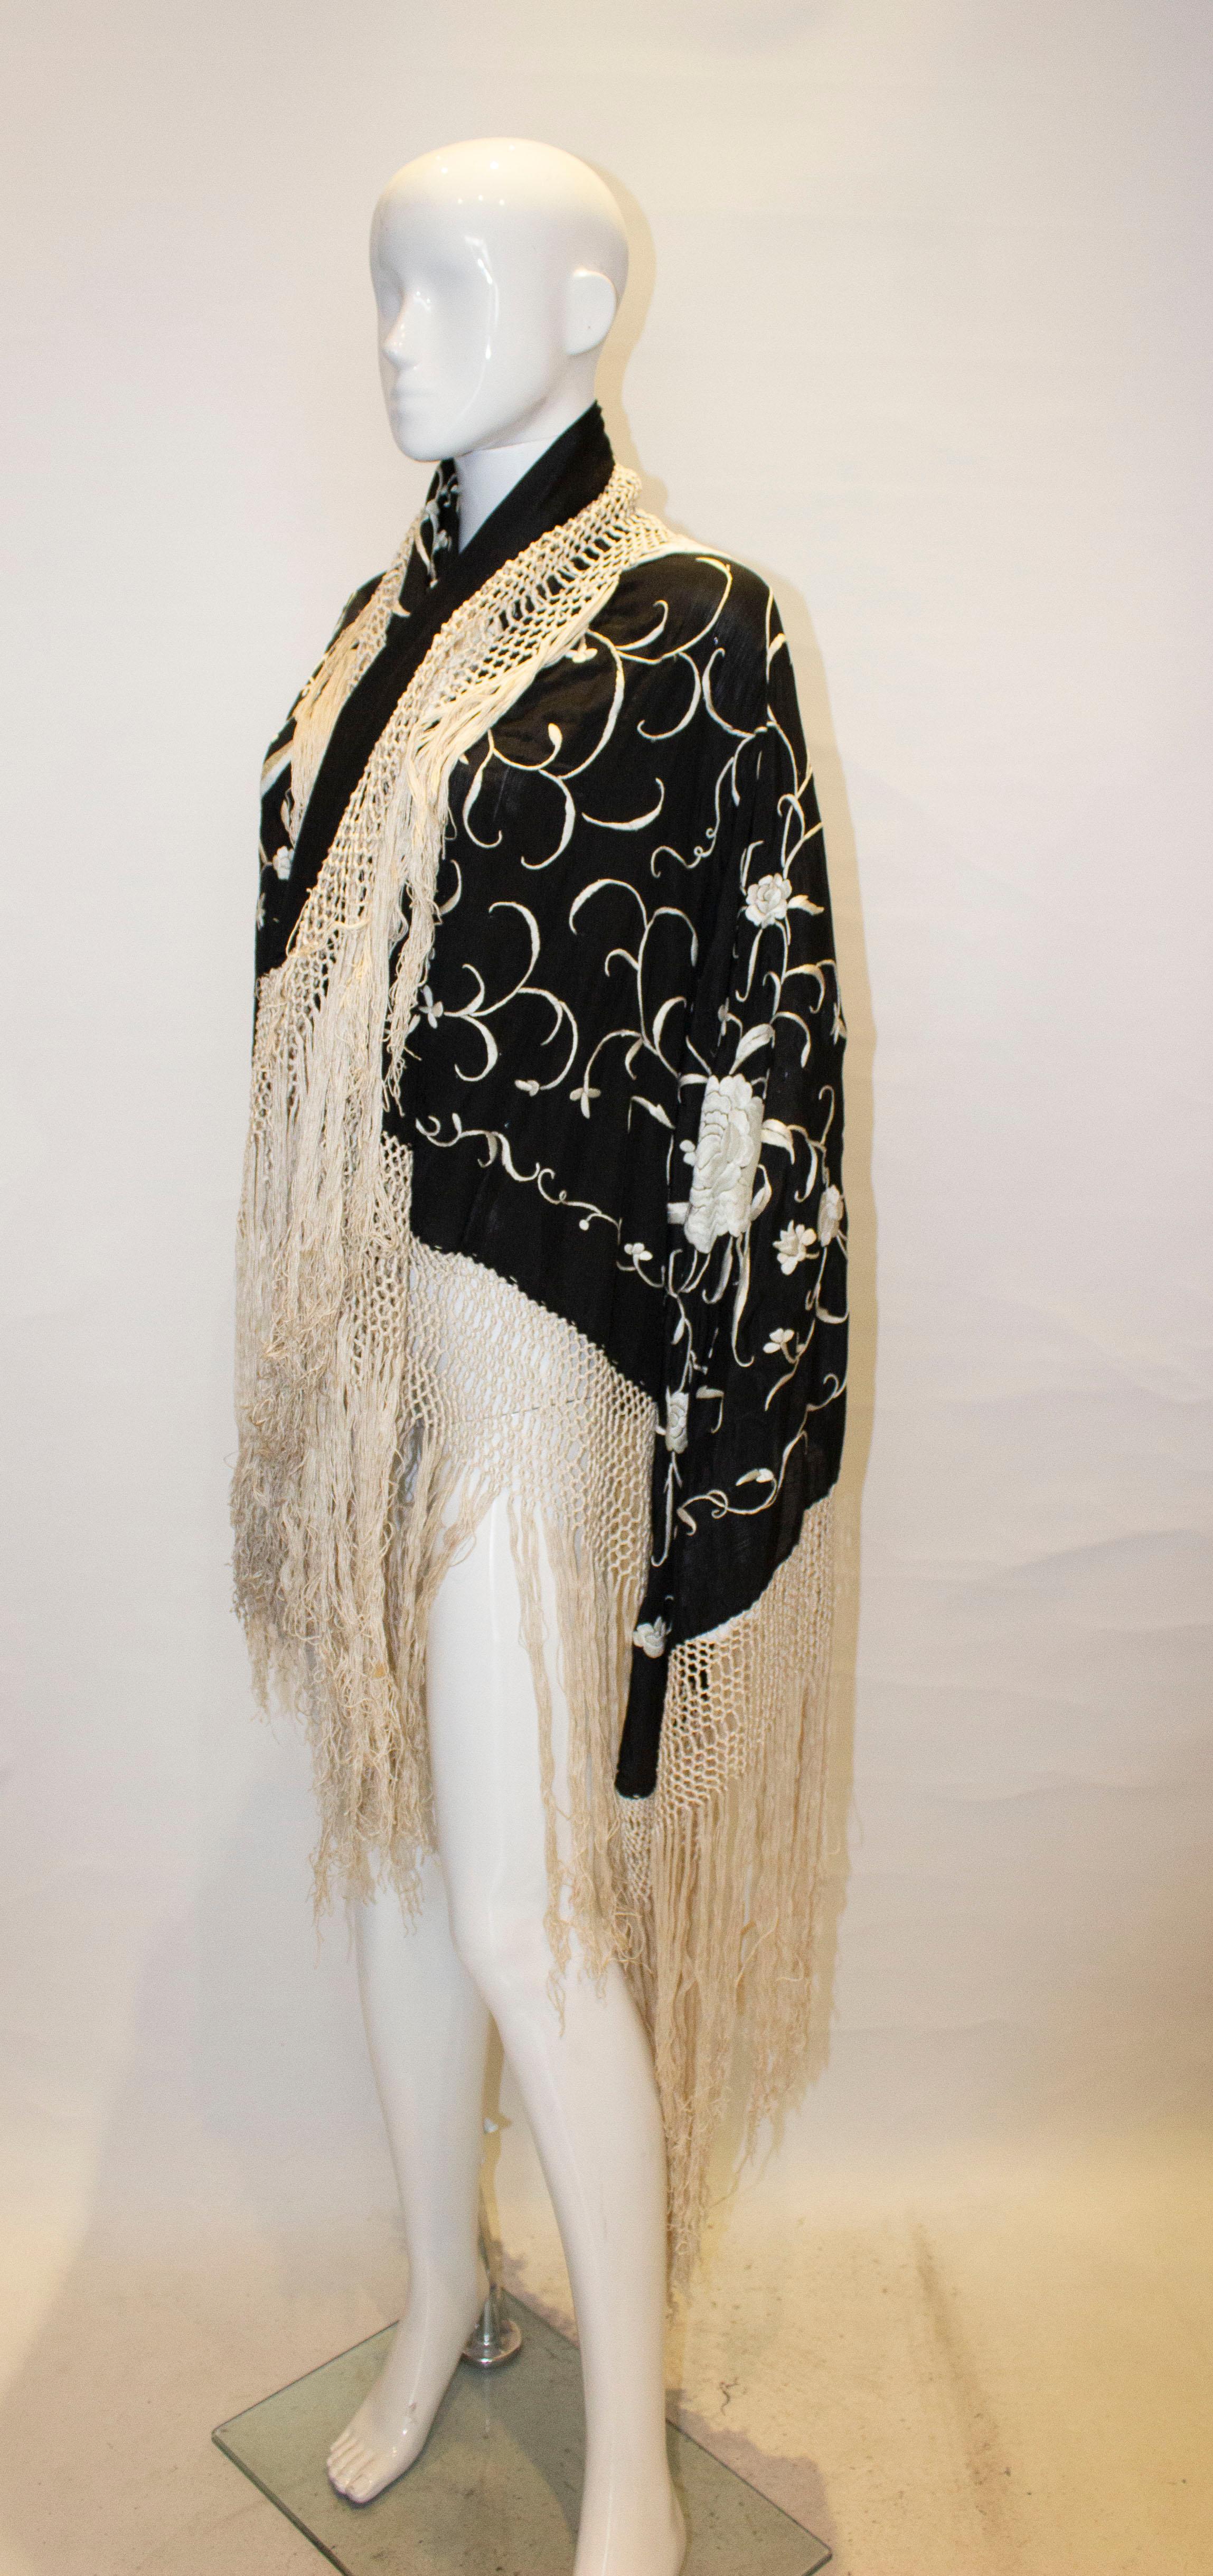 A wonderful vintage black silk piano shawl with wonderful floral embroidery and fringing.
Measurements: black shawl 50''x 50'', weaving is 3 1/2'' deep and the fringing is 16''.